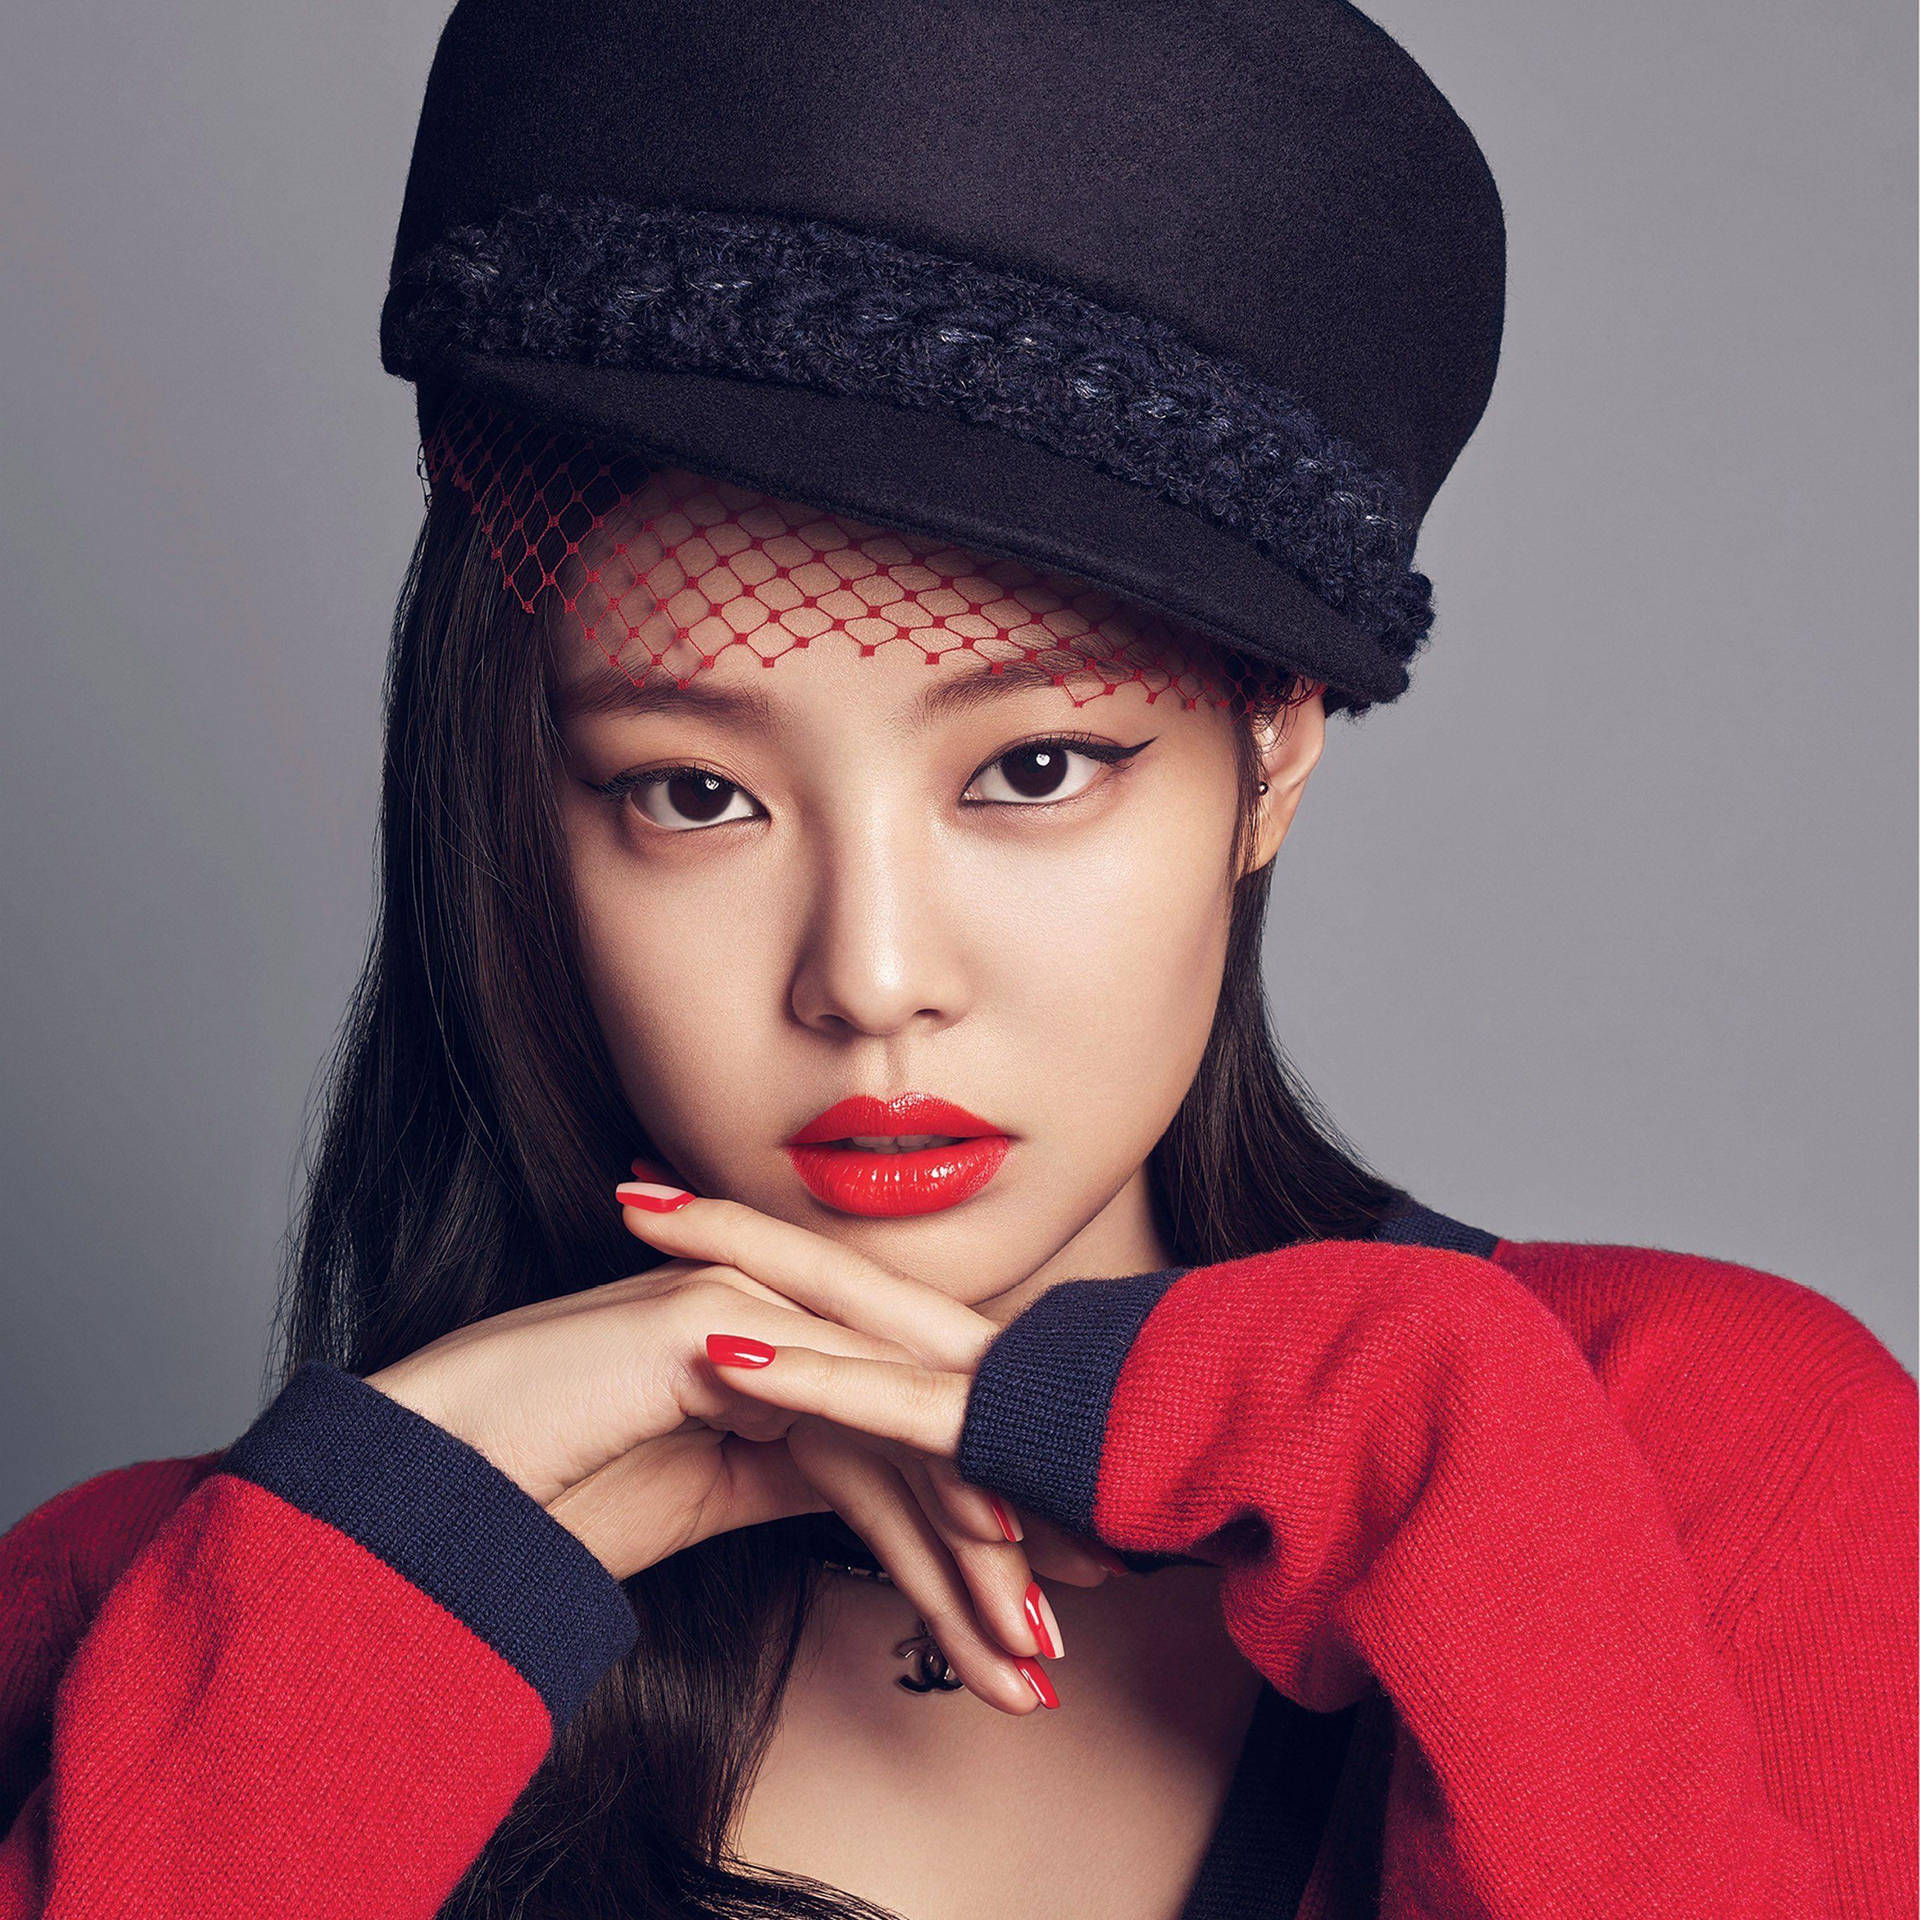 Jennie Wearing Red Coat And Hat Wallpaper